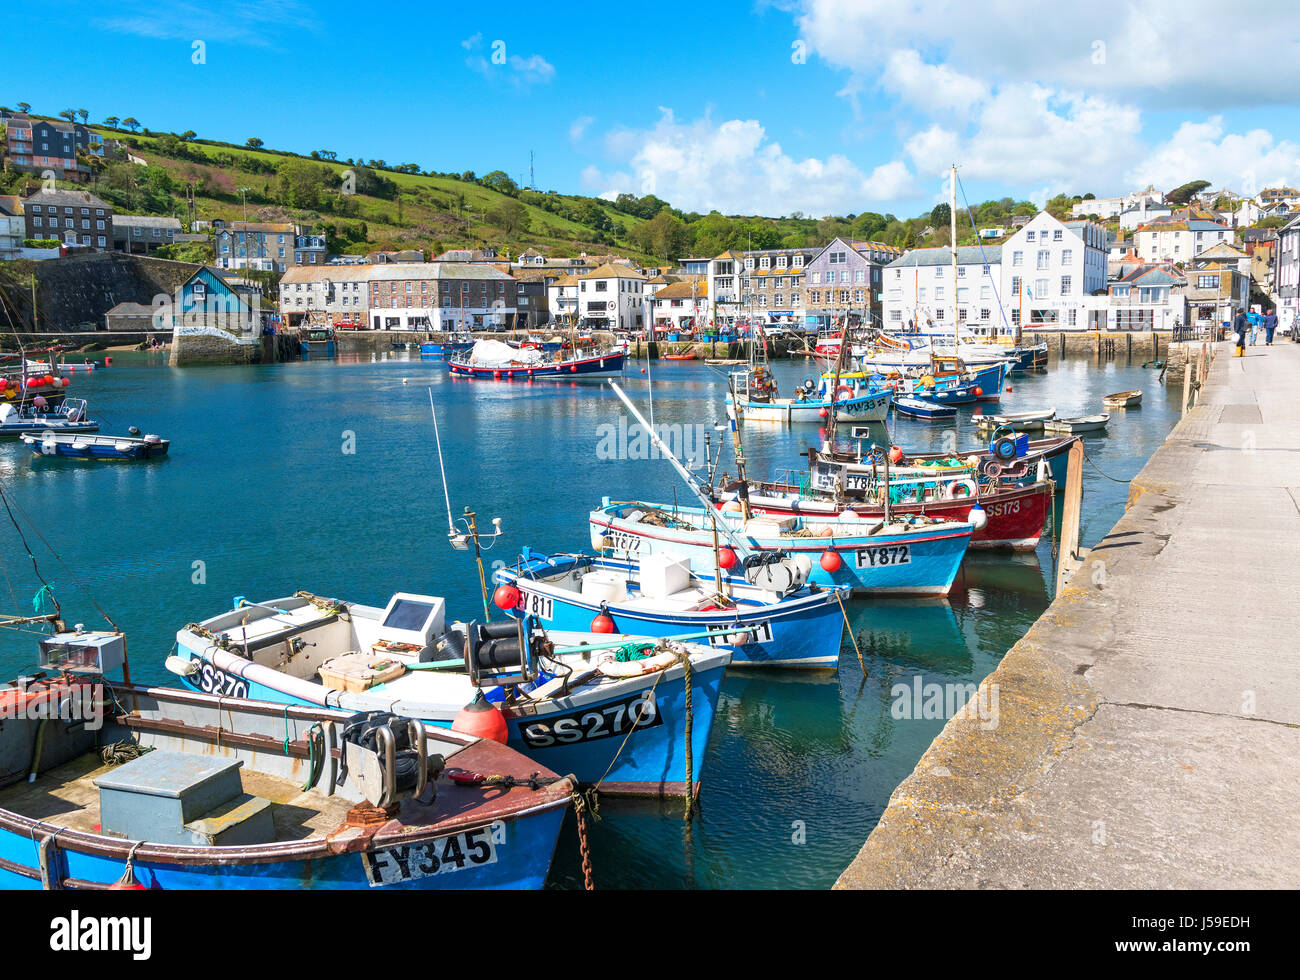 Fishing boats in the harbour at mevagissey, cornwall, england, britain, uk Stock Photo